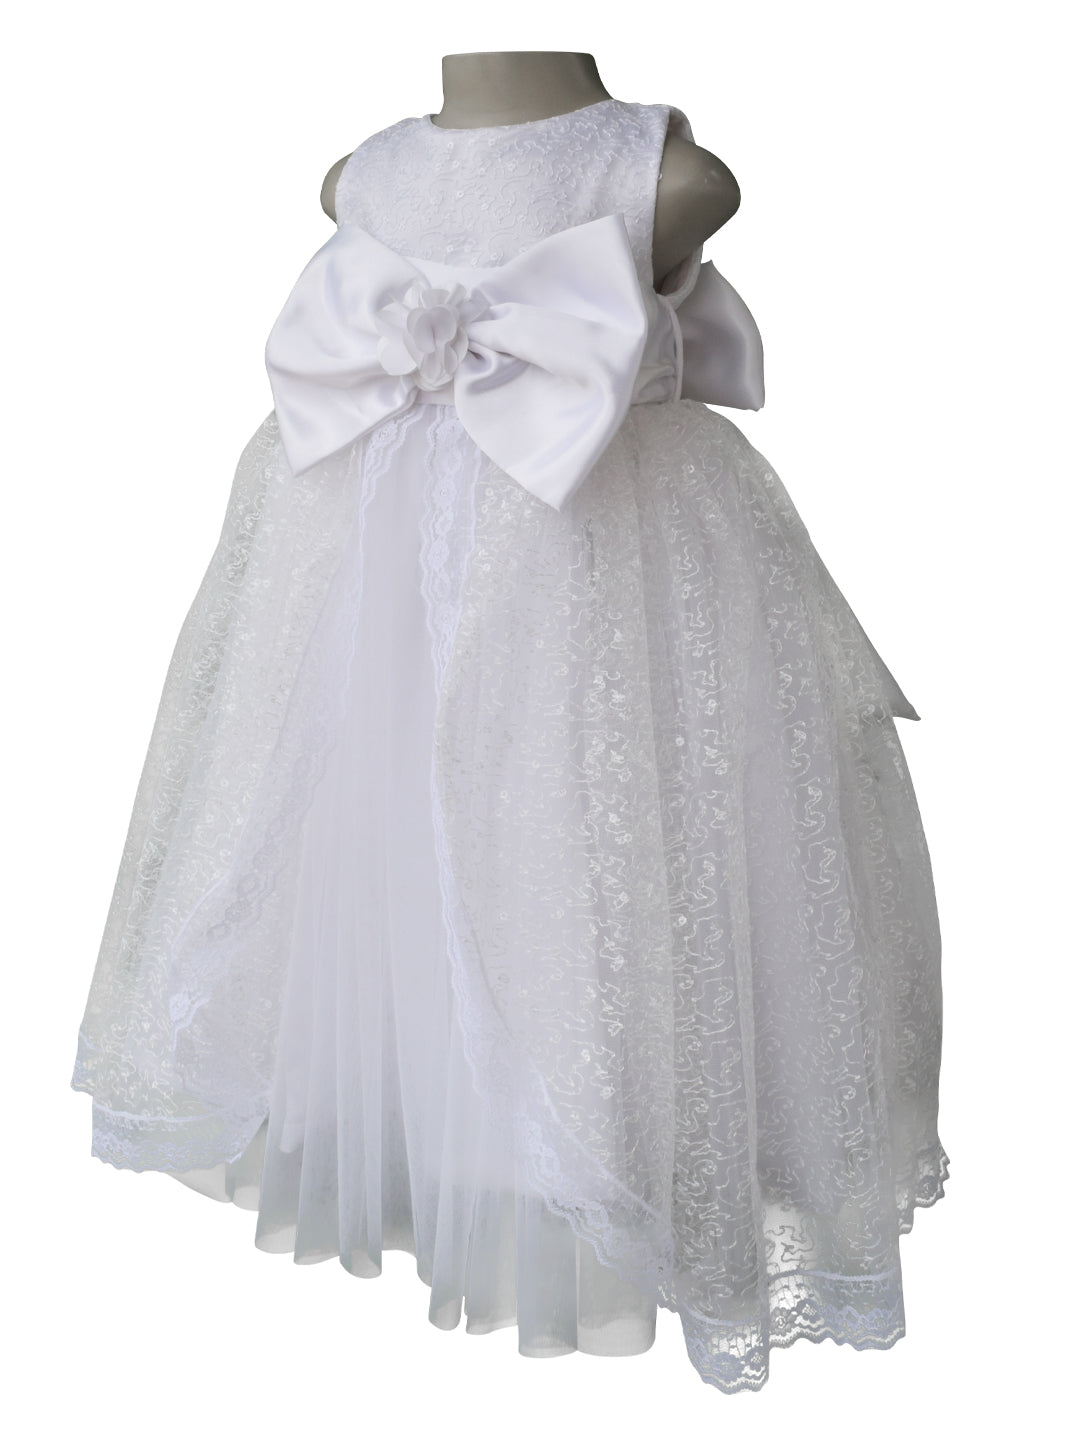 Regal SEQUINED Christening gown | Girls Christening gown | Baby girl b |  Caremour